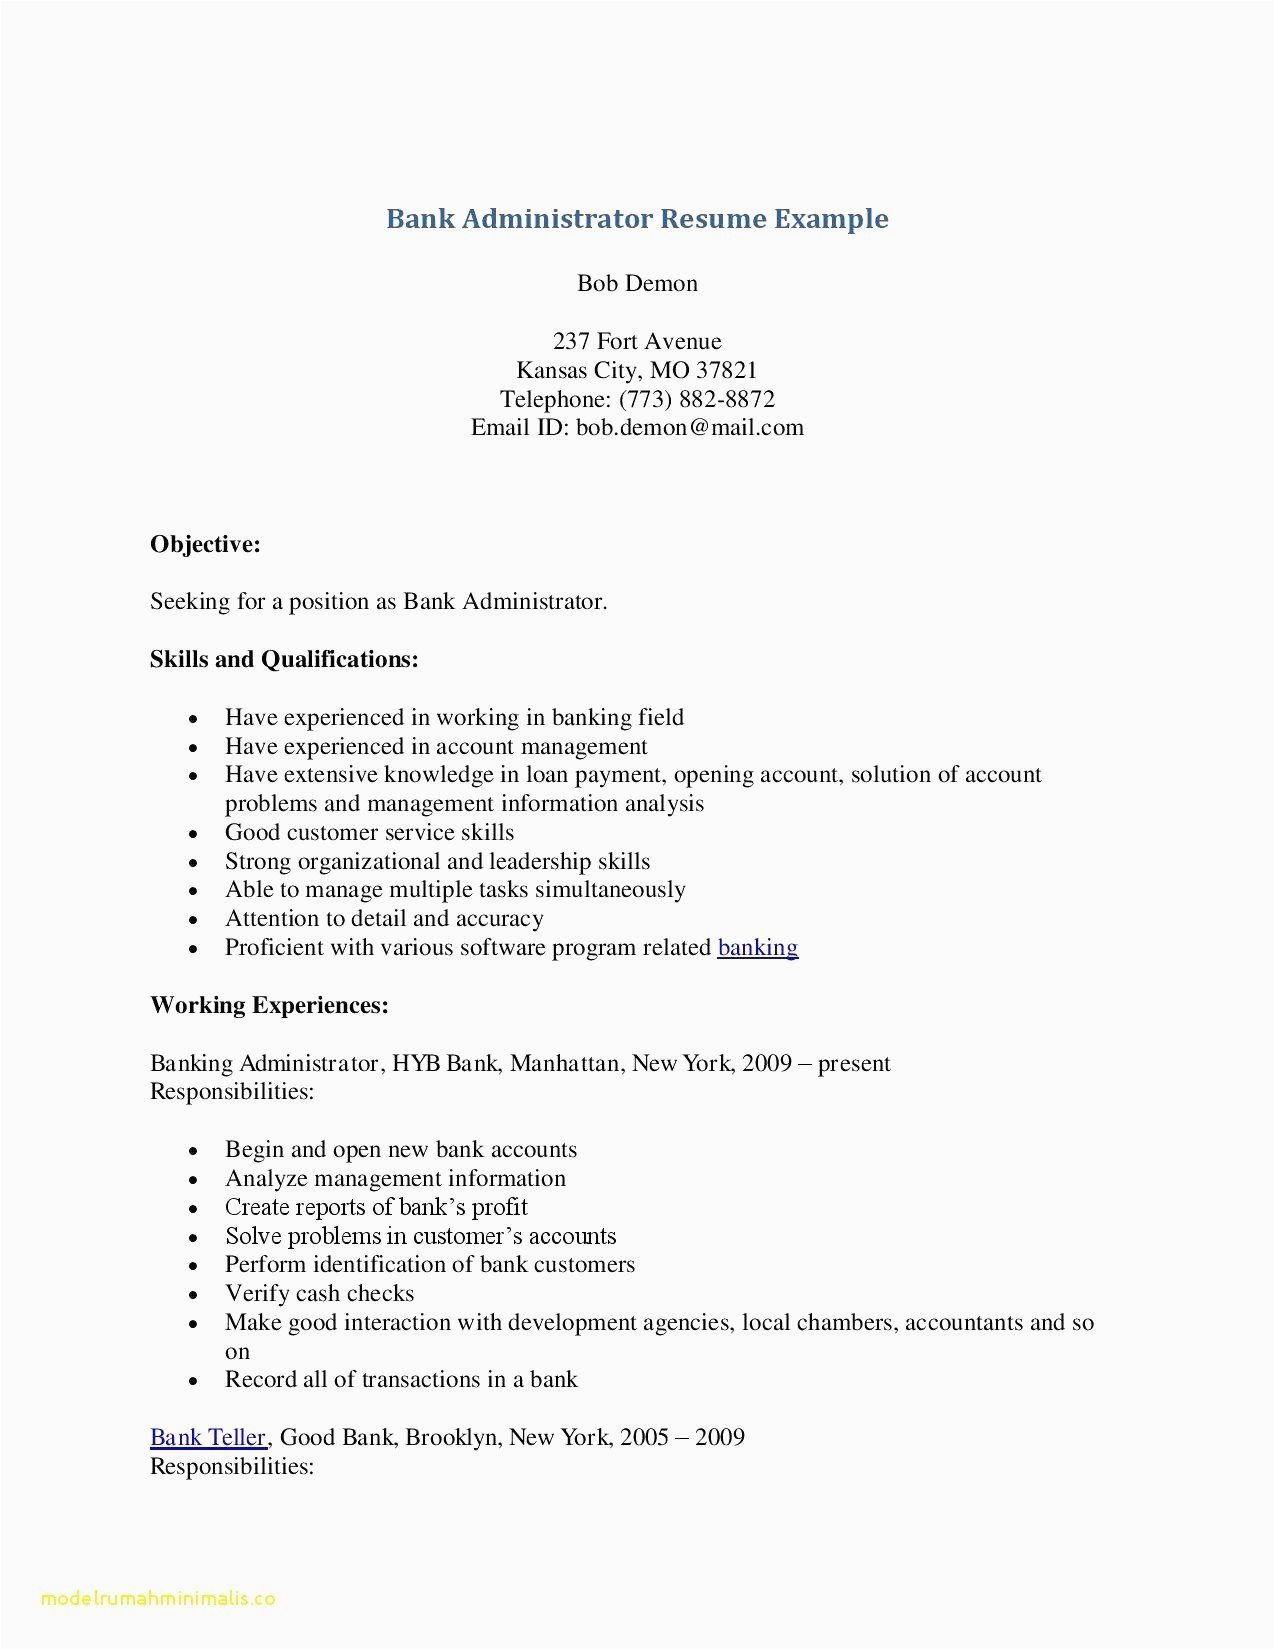 Resume Sample for Flight attendant with No Experience Flight attendant Resume No Experience Mryn ism